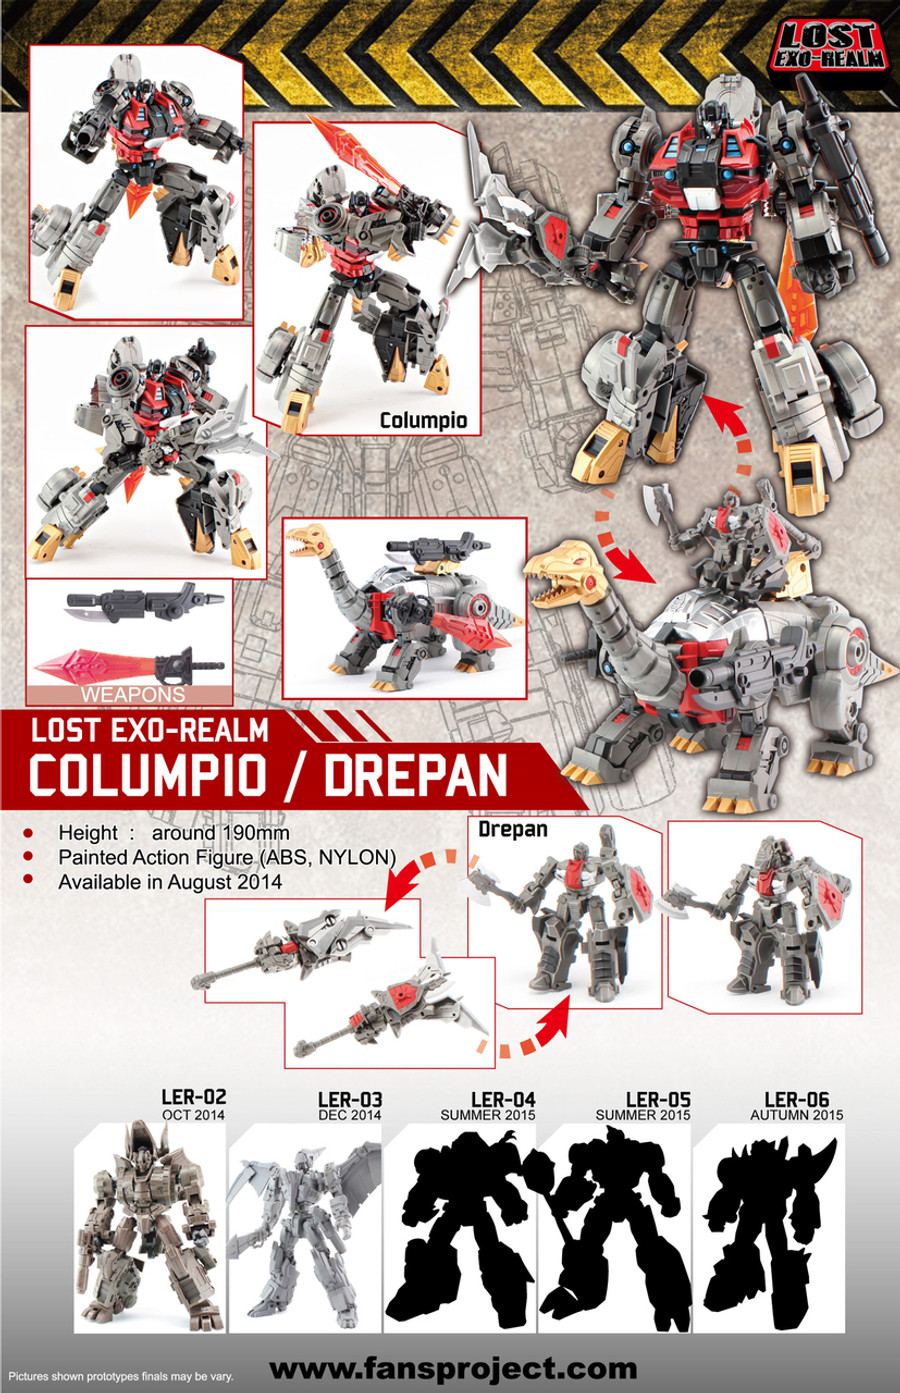 FansProject - Lost Exo Realm LER-01 - Columpio & Drepan